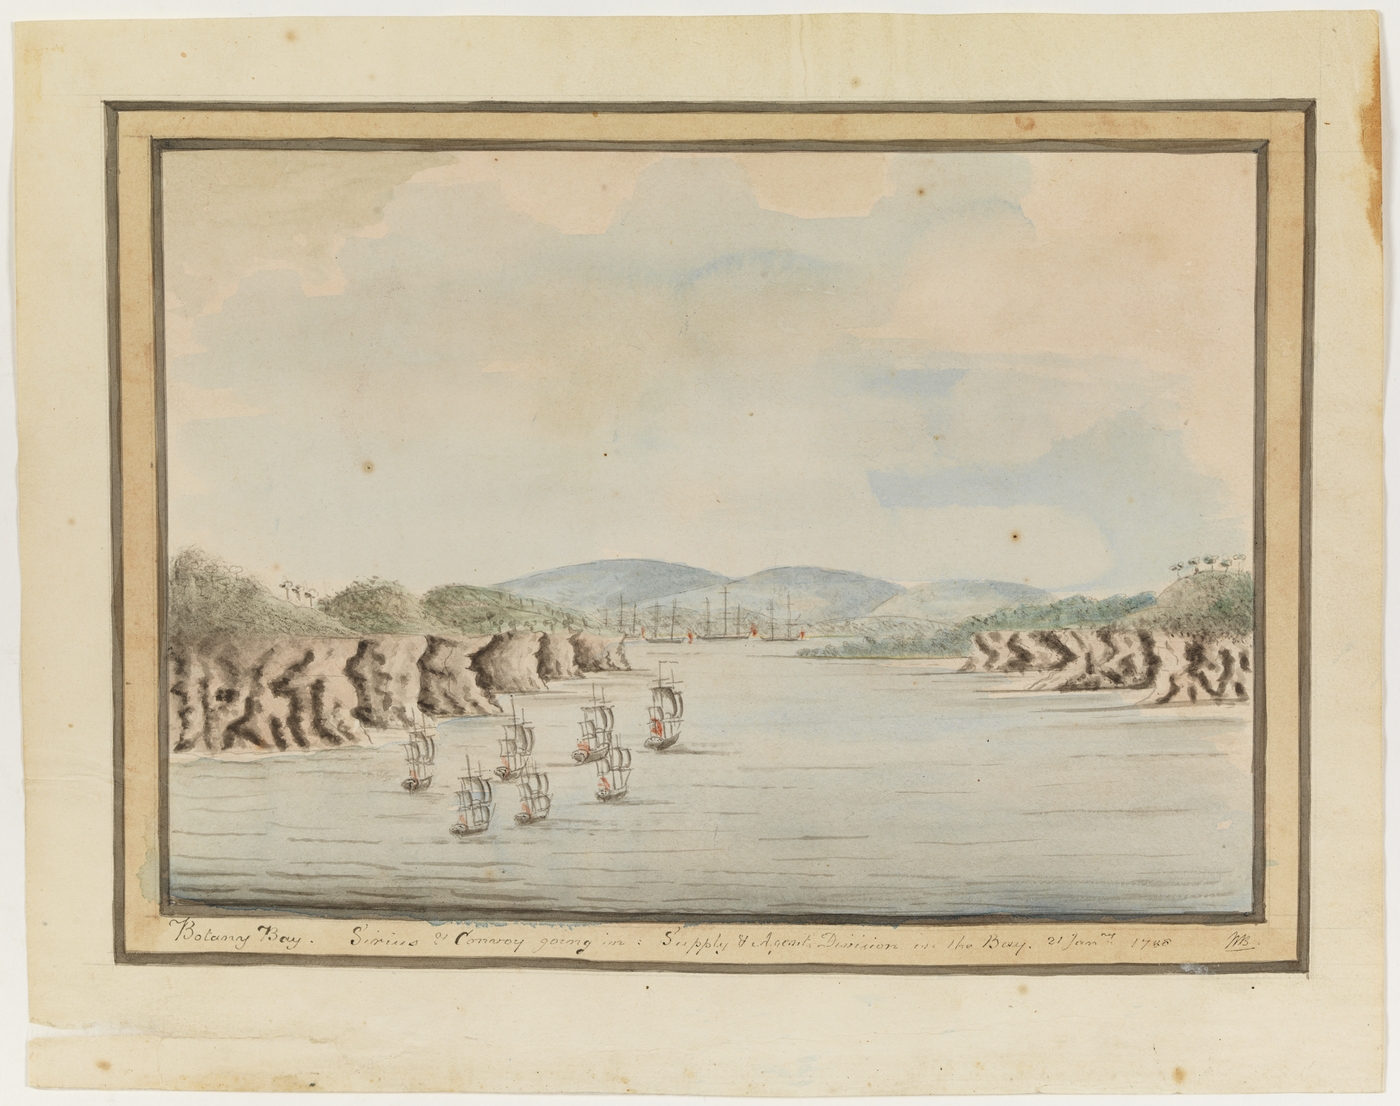 William Bradley, First Fleet, Botany Bay, 21 January 1788, A Voyage to New South Wales Journal